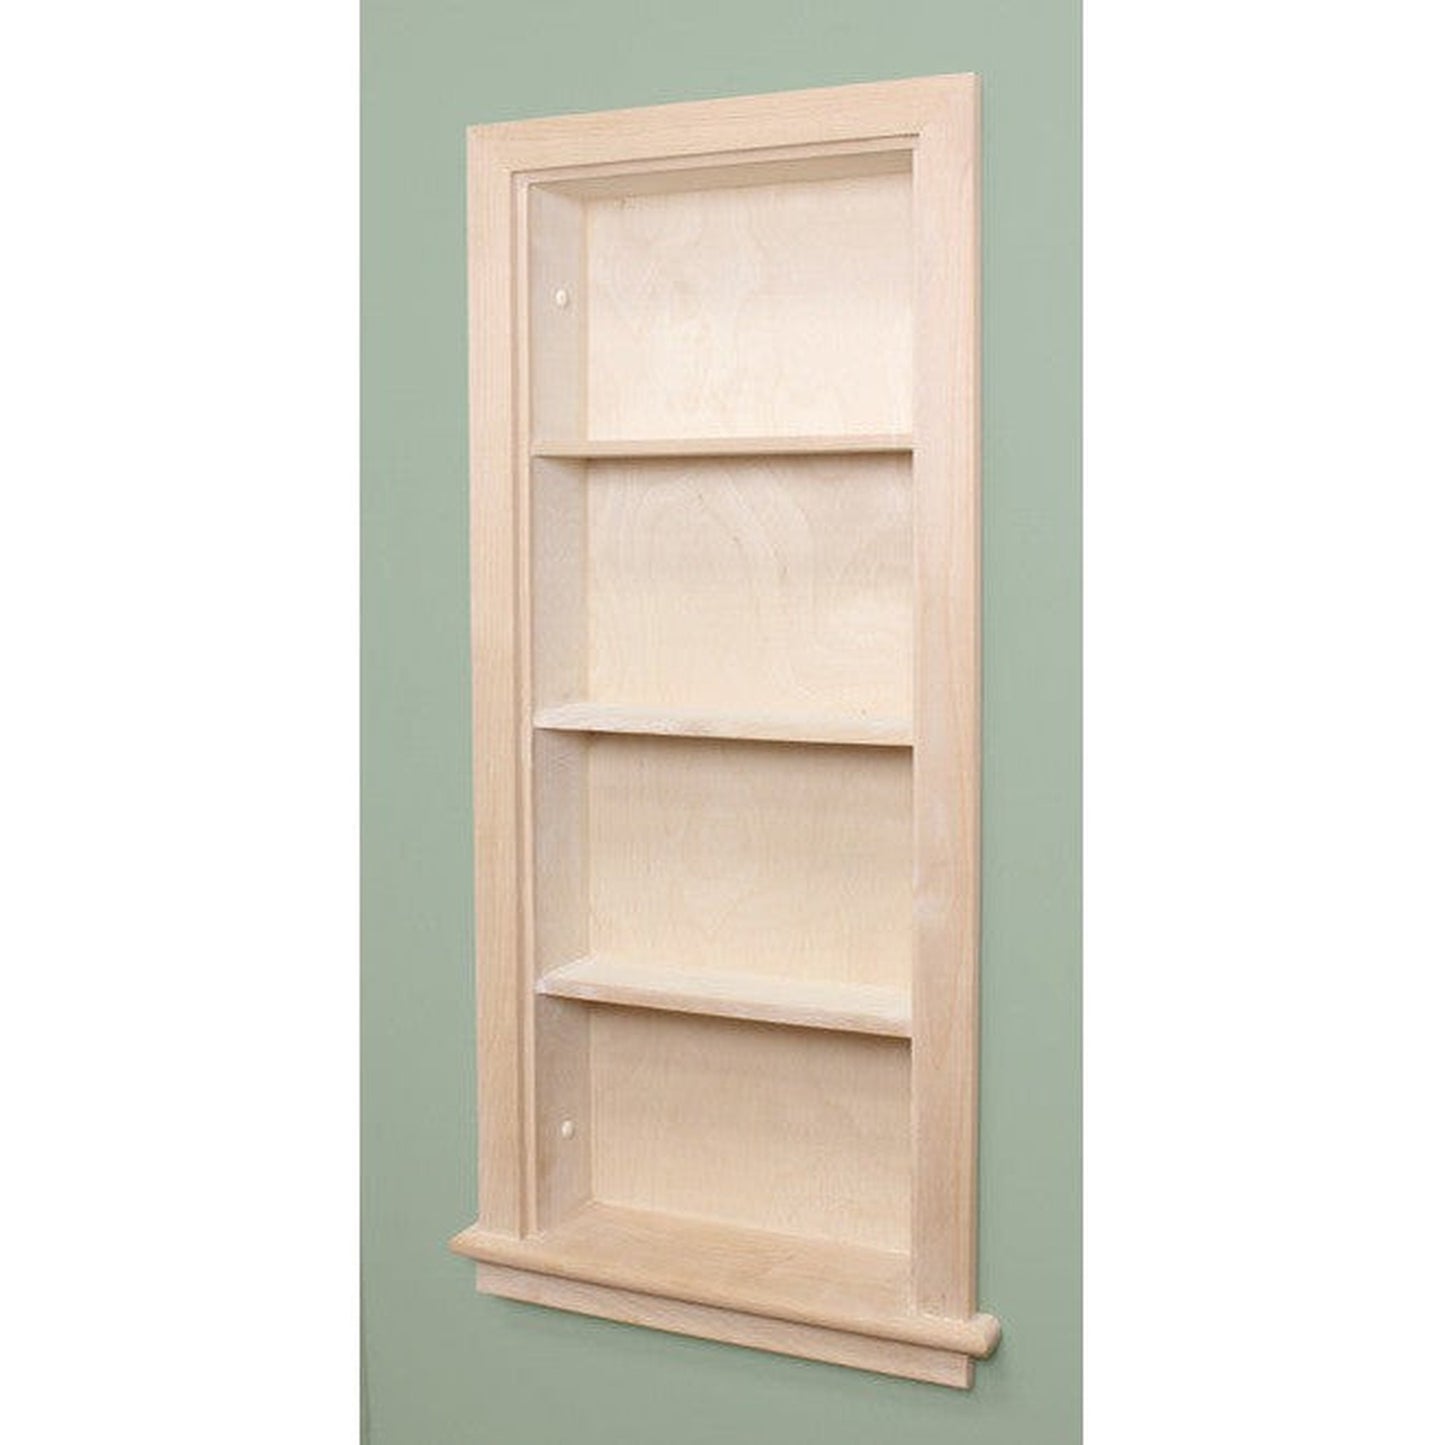 Fox Hollow Furnishings Aiden 14" x 36" Unfinished Recessed Wall Niche With Plain Back and Three Shelves